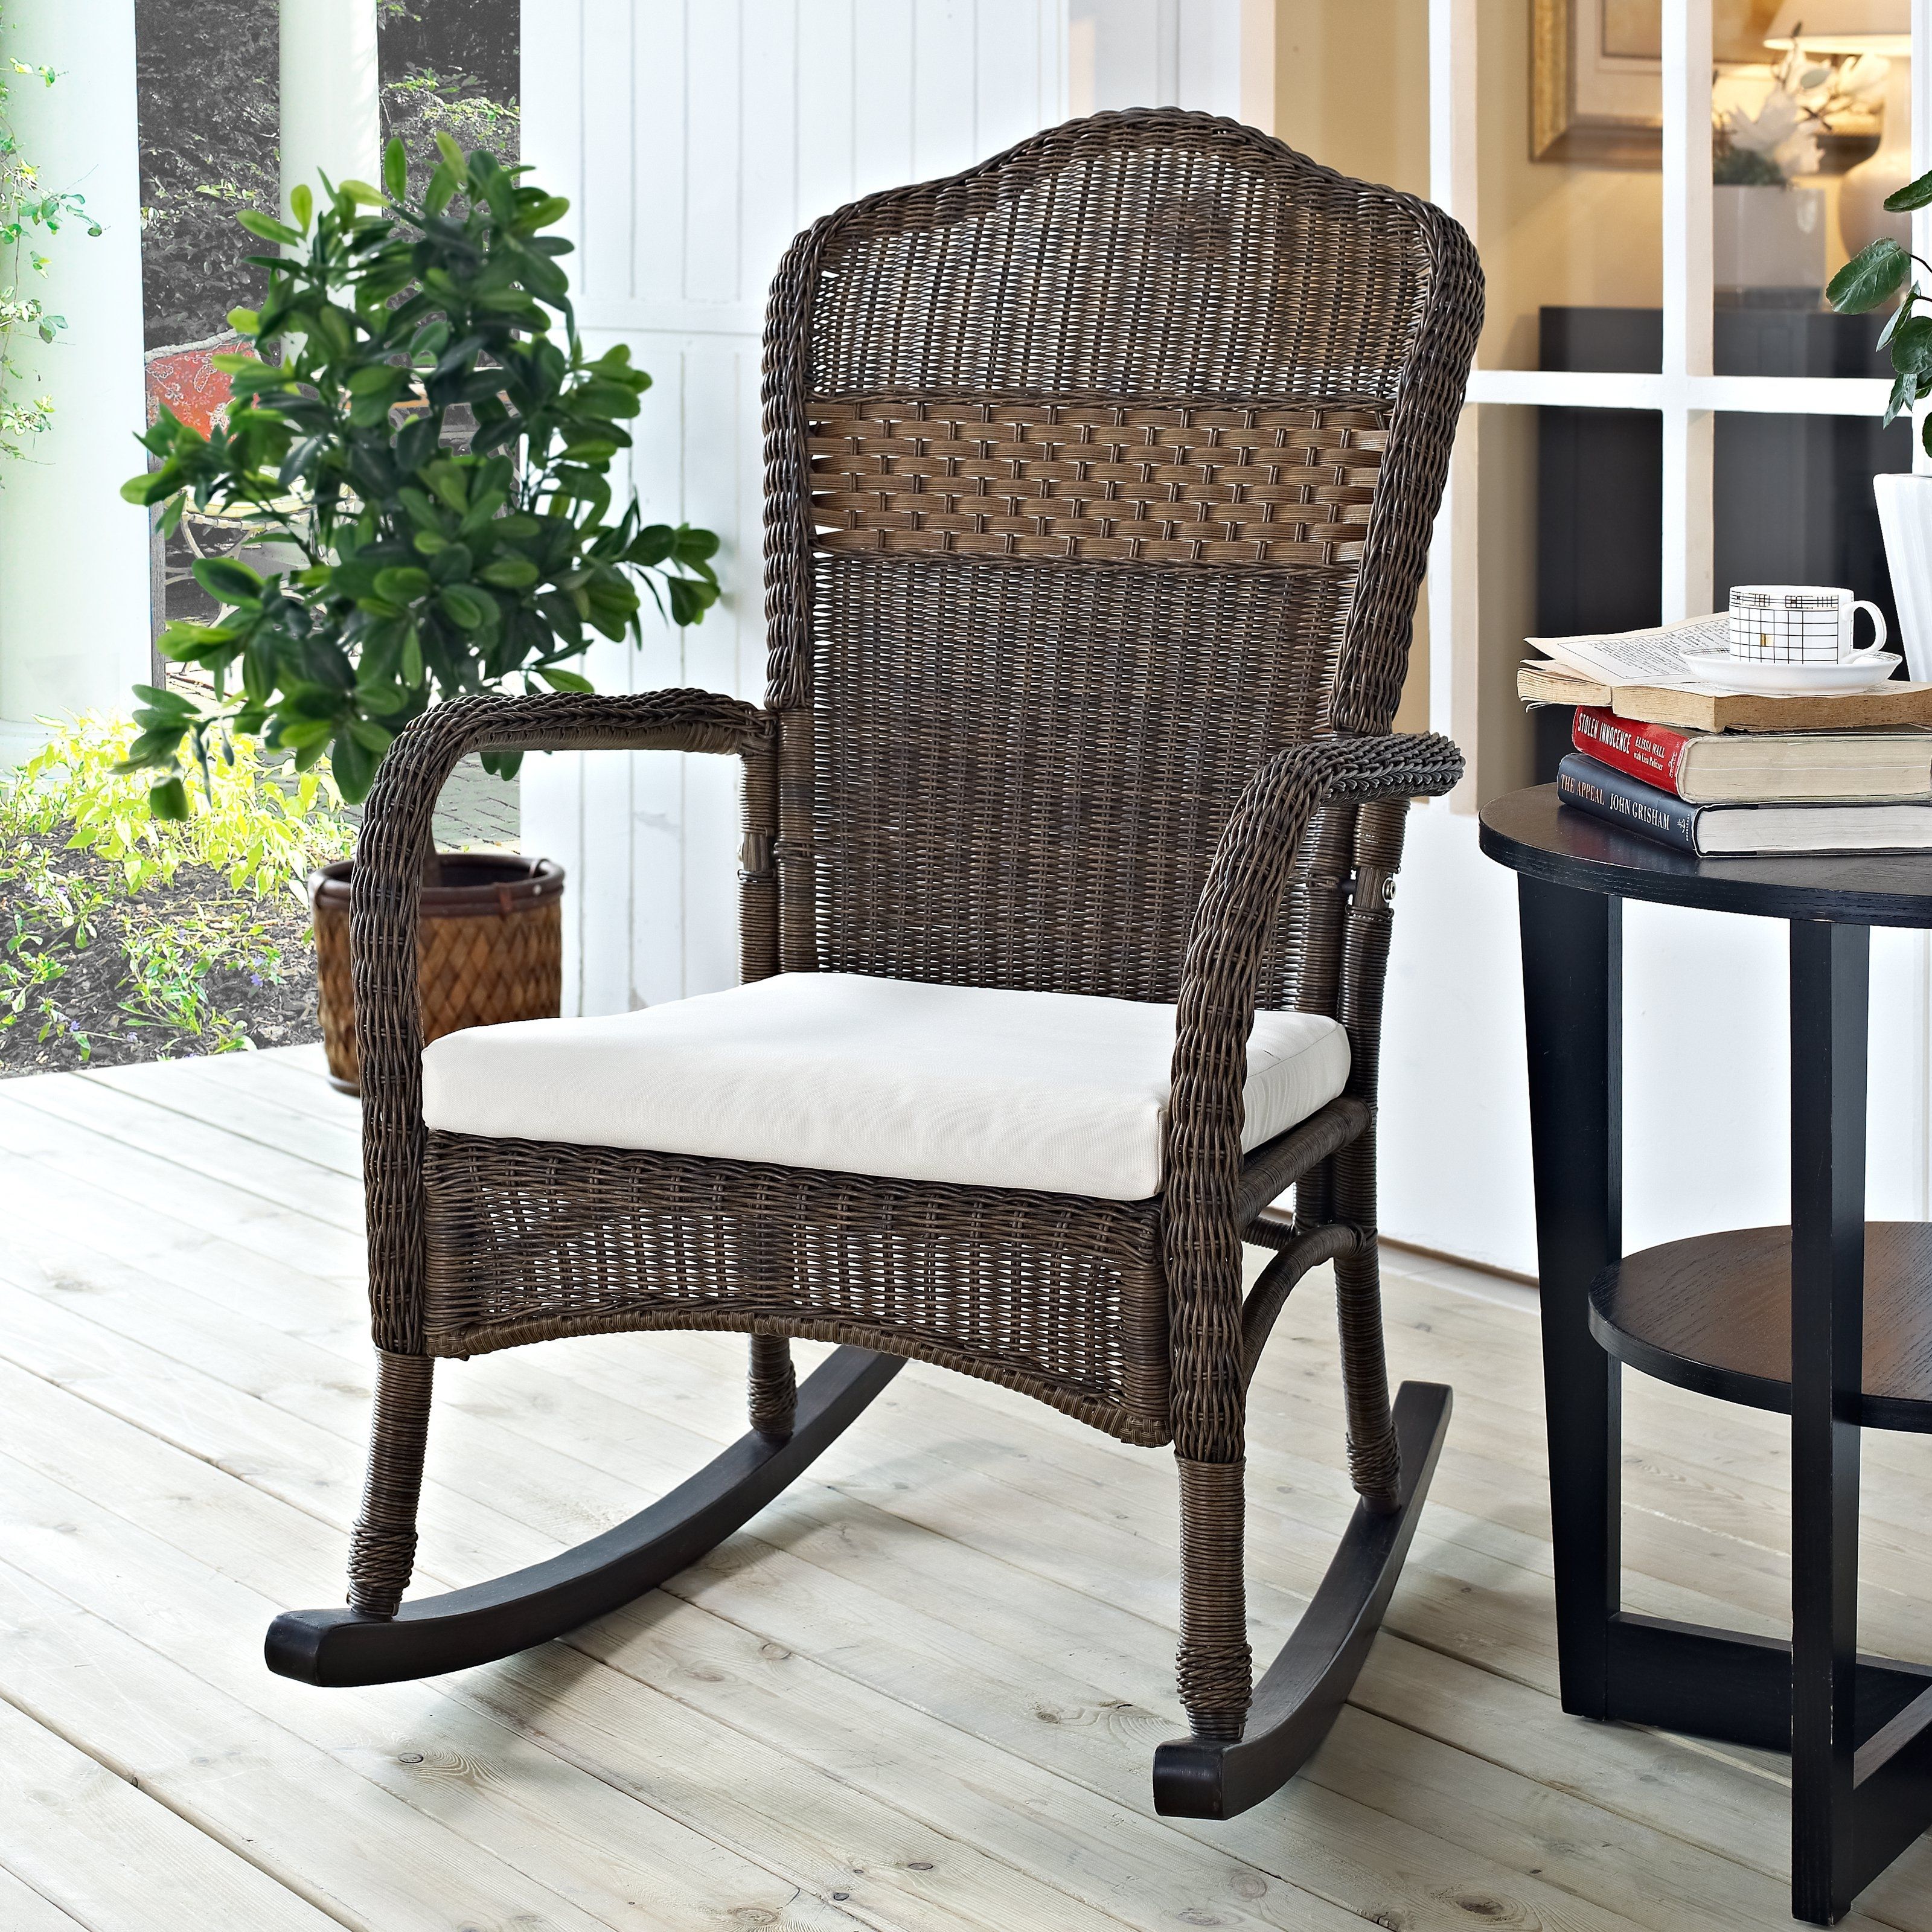 Coral Coast Mocha Resin Wicker Rocking Chair With Beige Rocking In Outdoor Wicker Rocking Chairs (View 5 of 15)